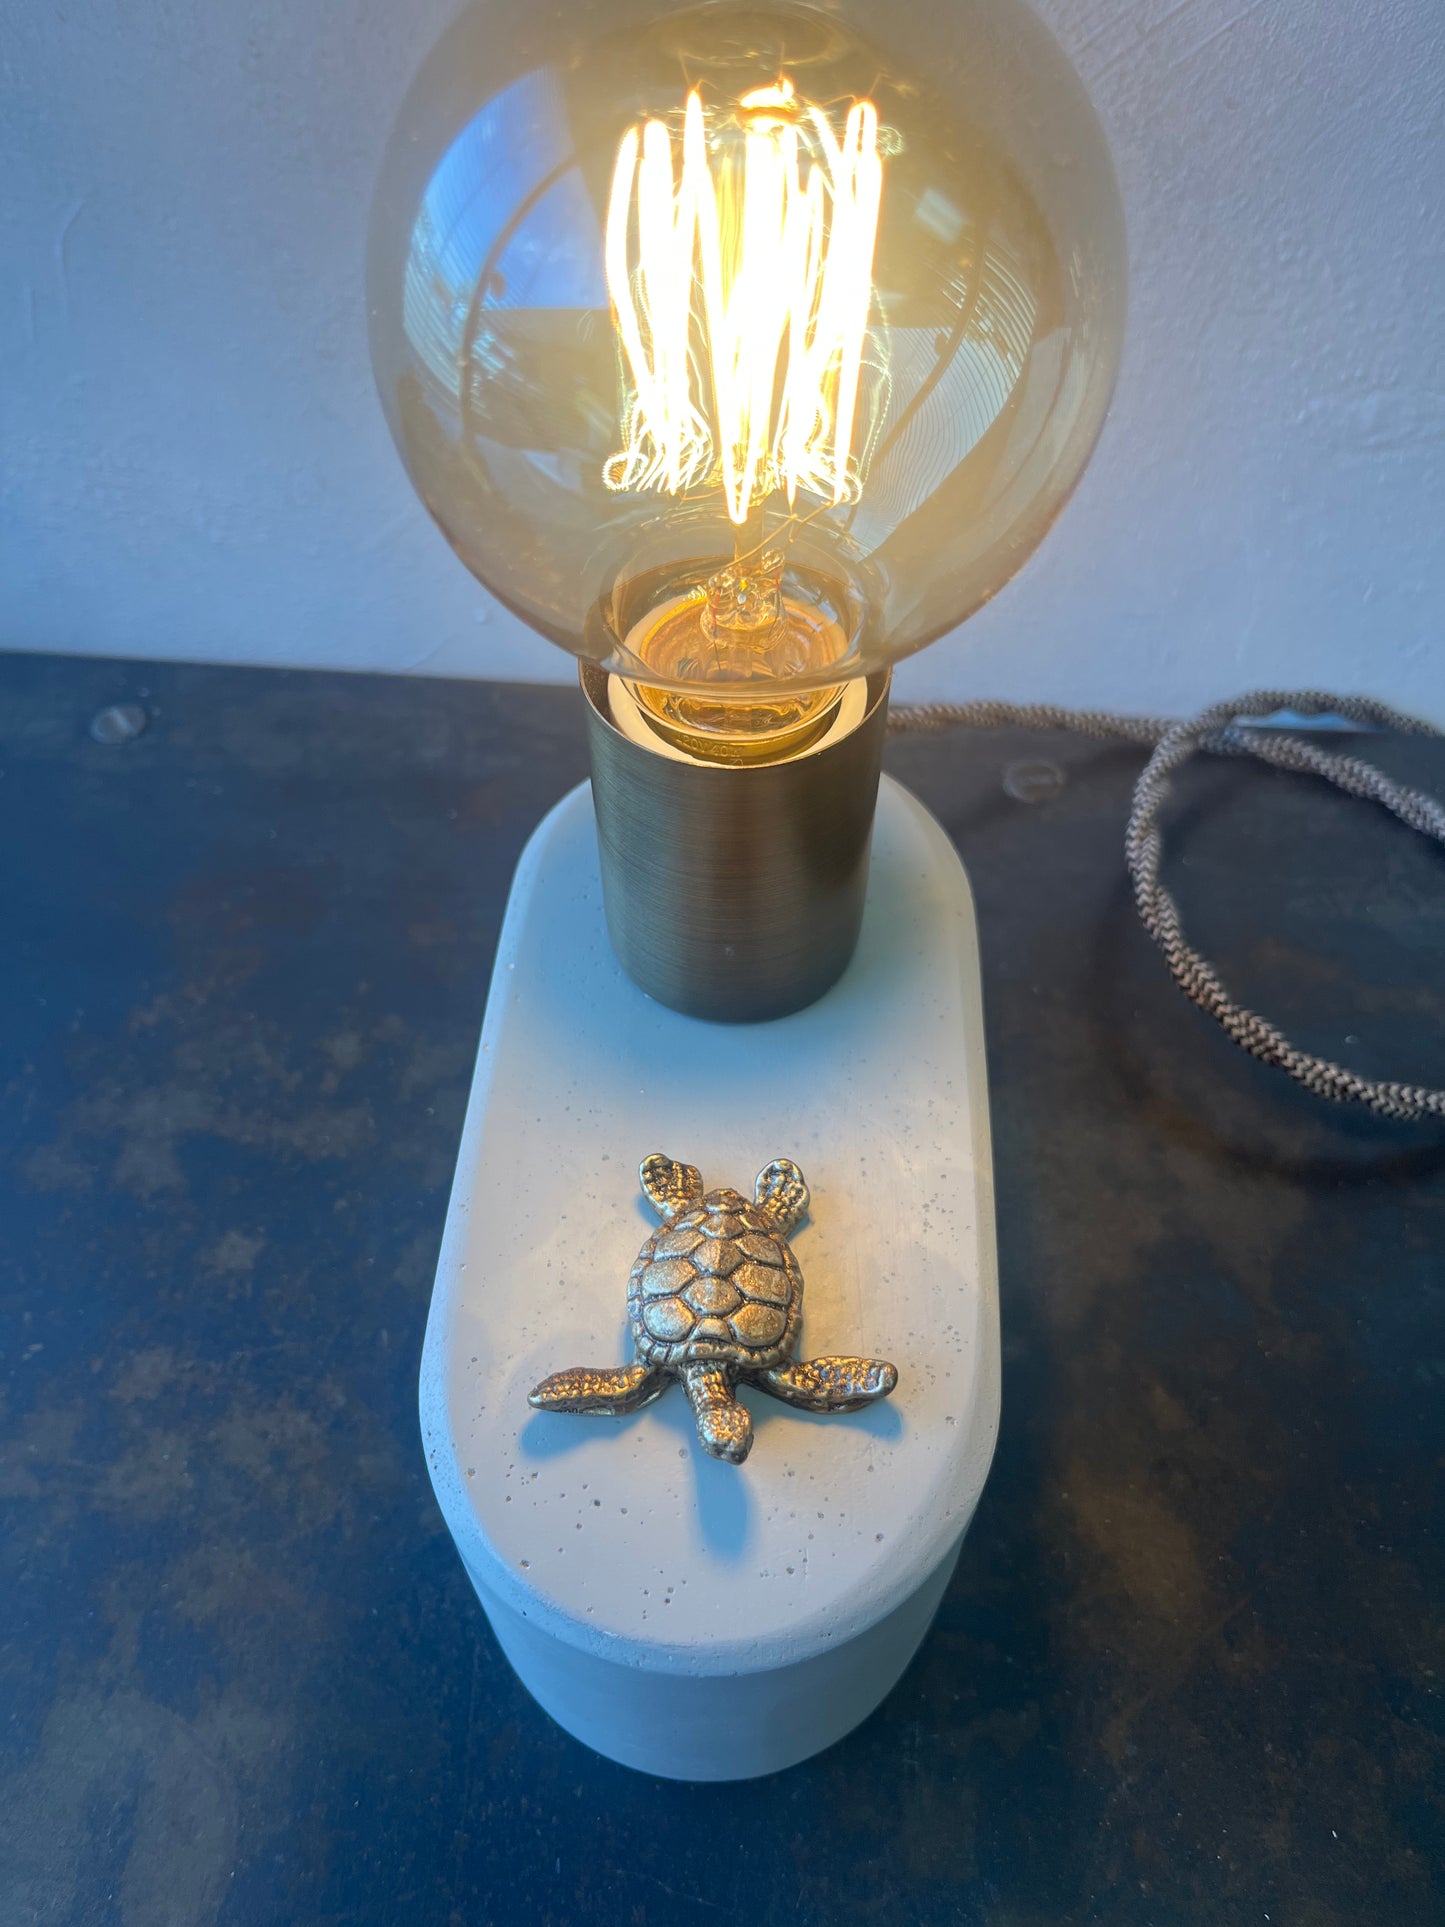 Turtle Lamp / Touch-Controlled